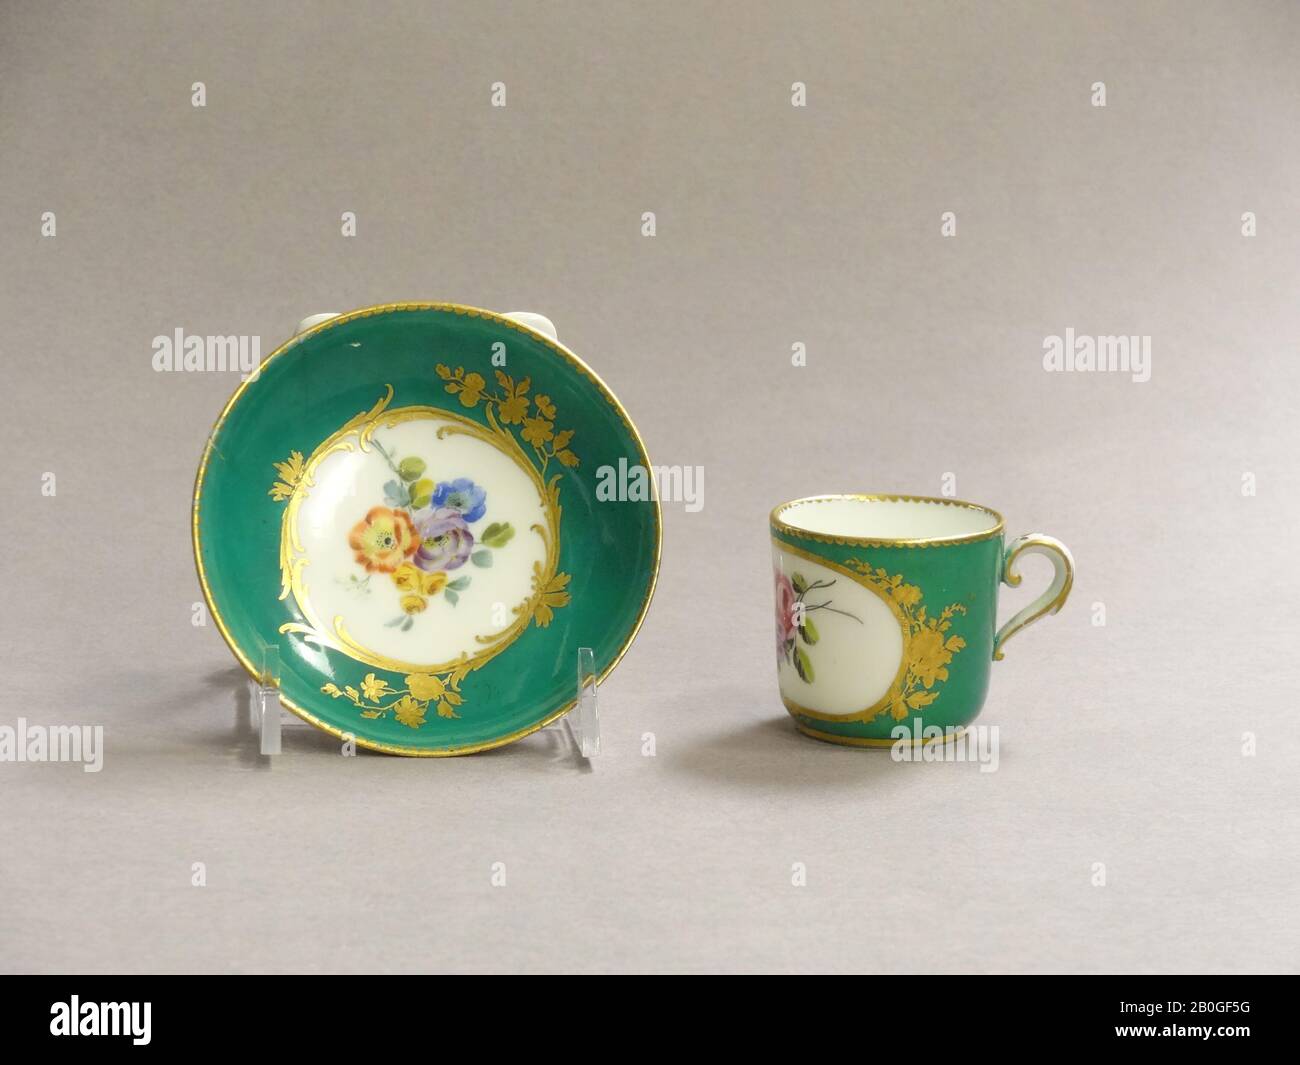 Sèvres Porcelain Manufactory, French, 1756–present, Jean-René Dubois, (French, active 1756–1757), Cup and Saucer, 1759, Soft-paste porcelain, Cup: 1 13/16 x 1 15/16 x 1 15/16 in. (4.6 x 4.9 x 4.9 cm Stock Photo